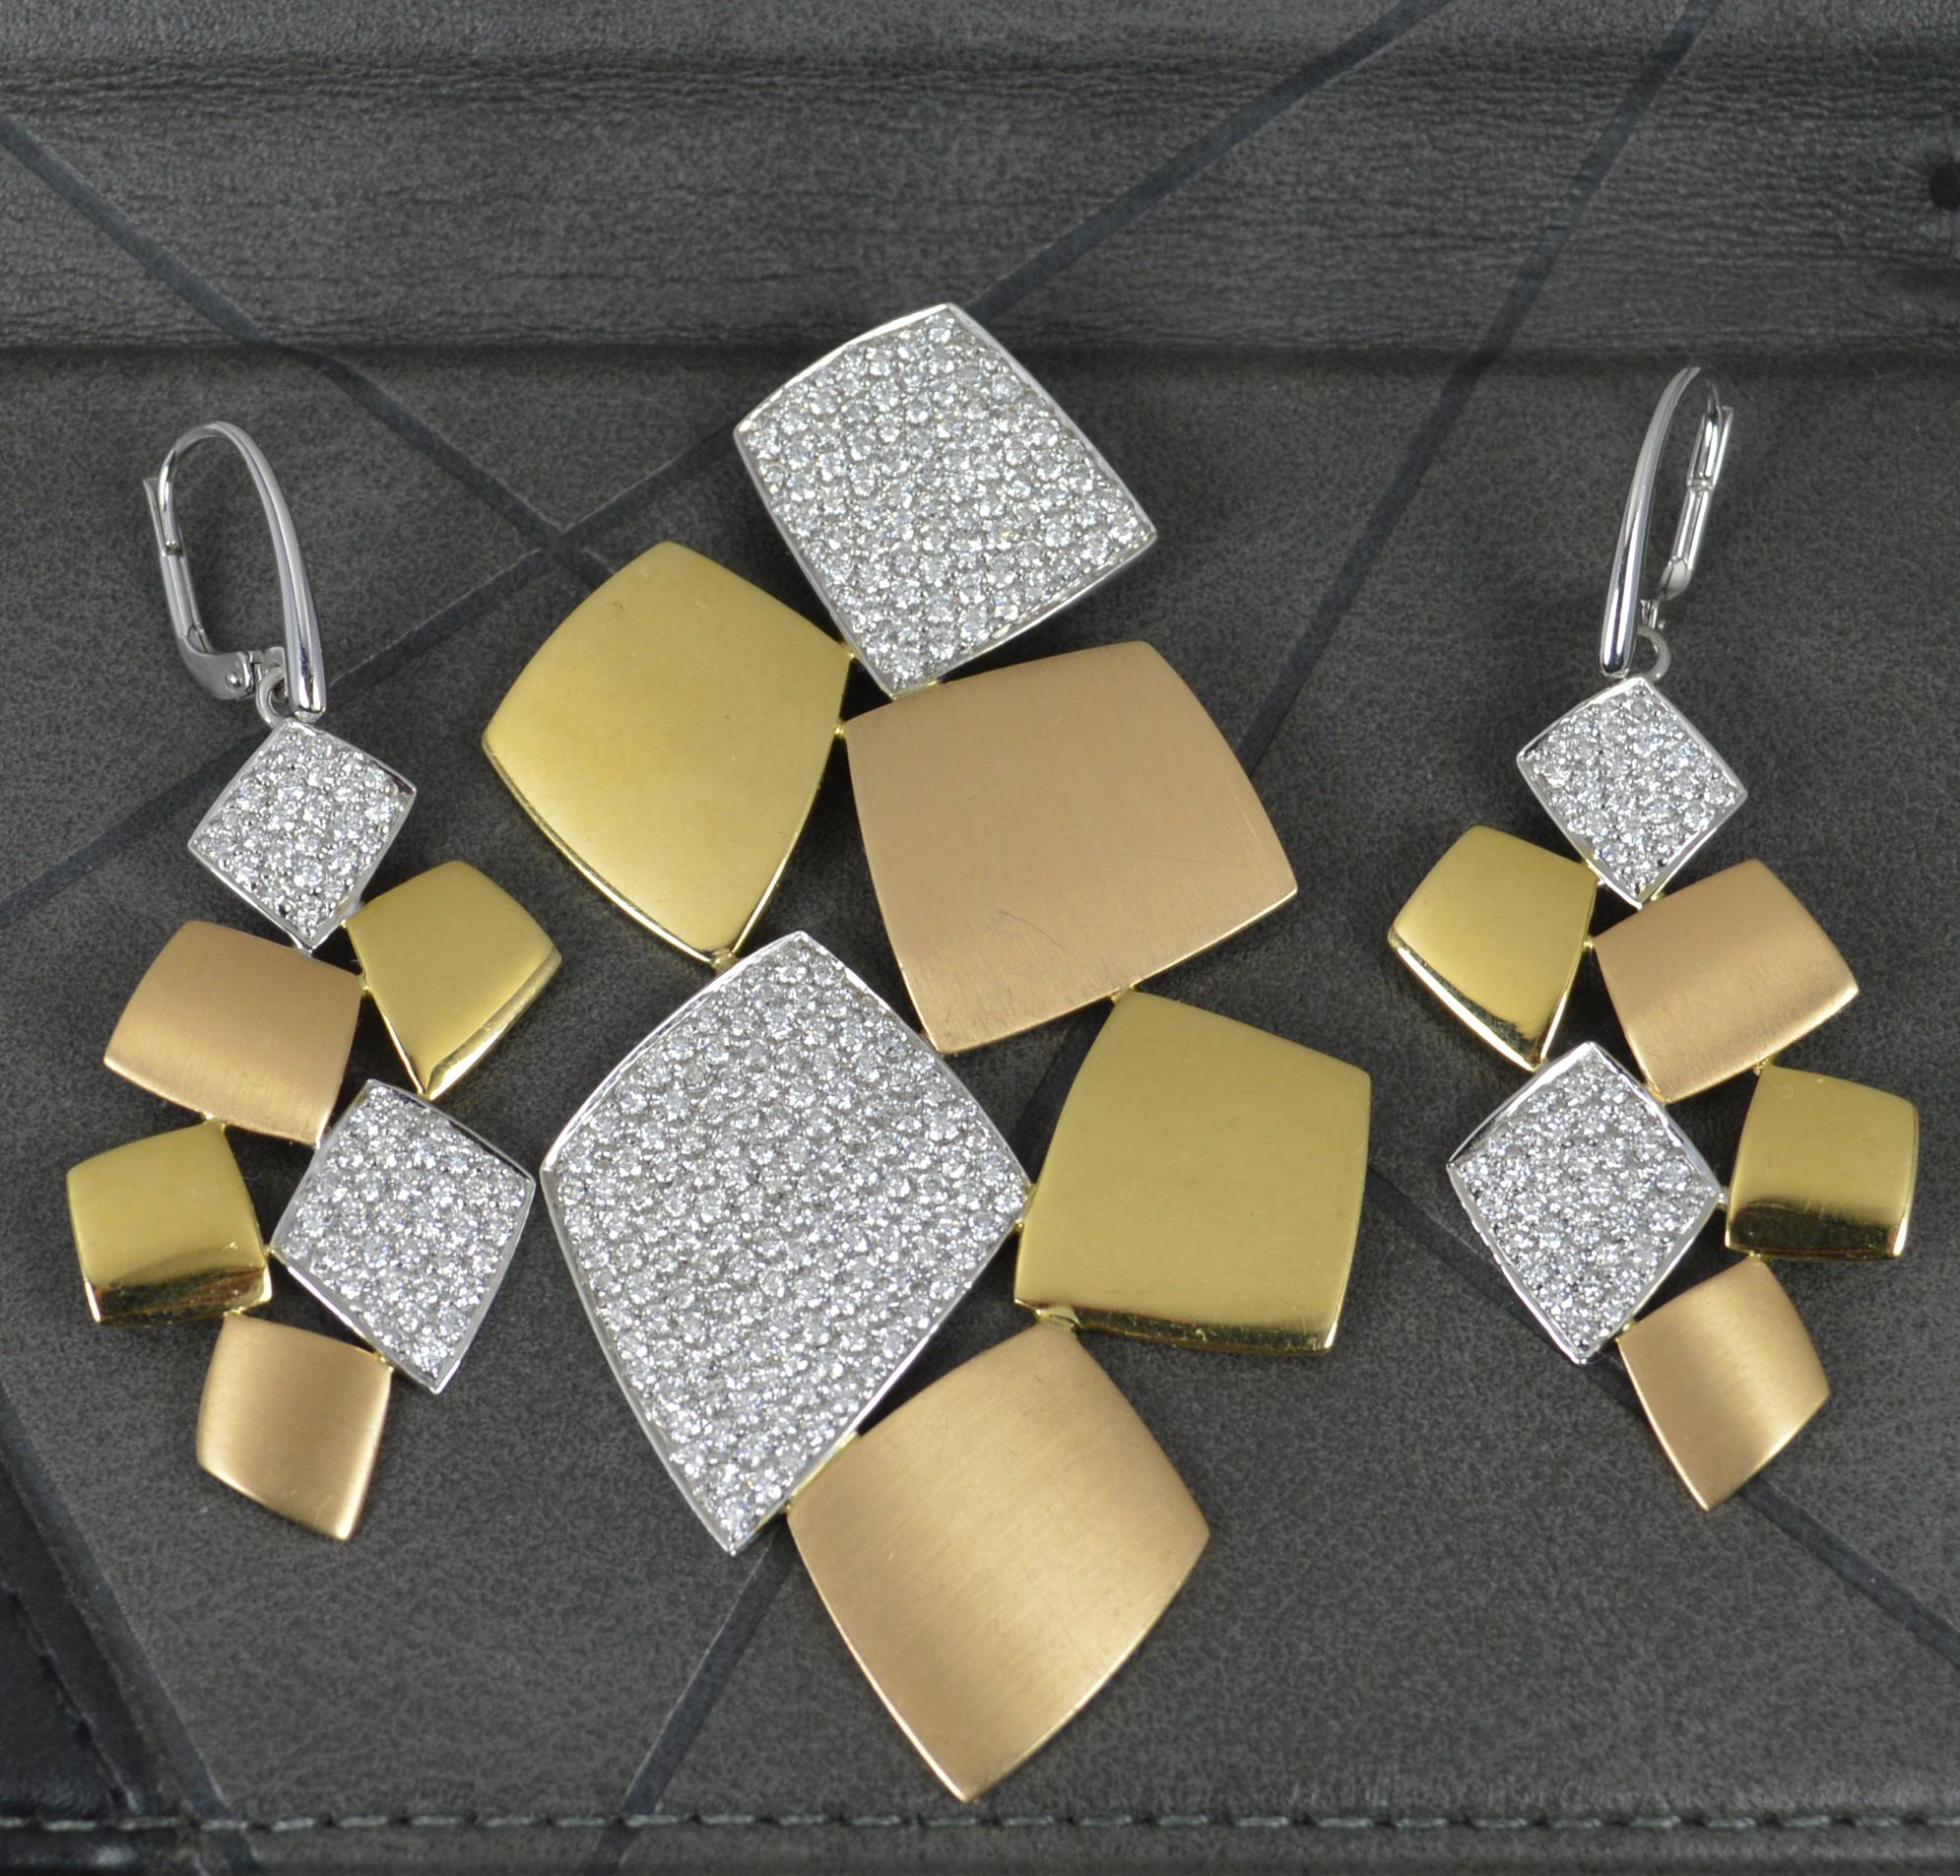 A superb 18 carat gold and diamond pendant and earrings suite.
Designed in 18ct gold. The two diamond sections in white gold, the two yellow gold panels with a polished finish and the rose gold panels with a brushed finish.
The earrings pave set